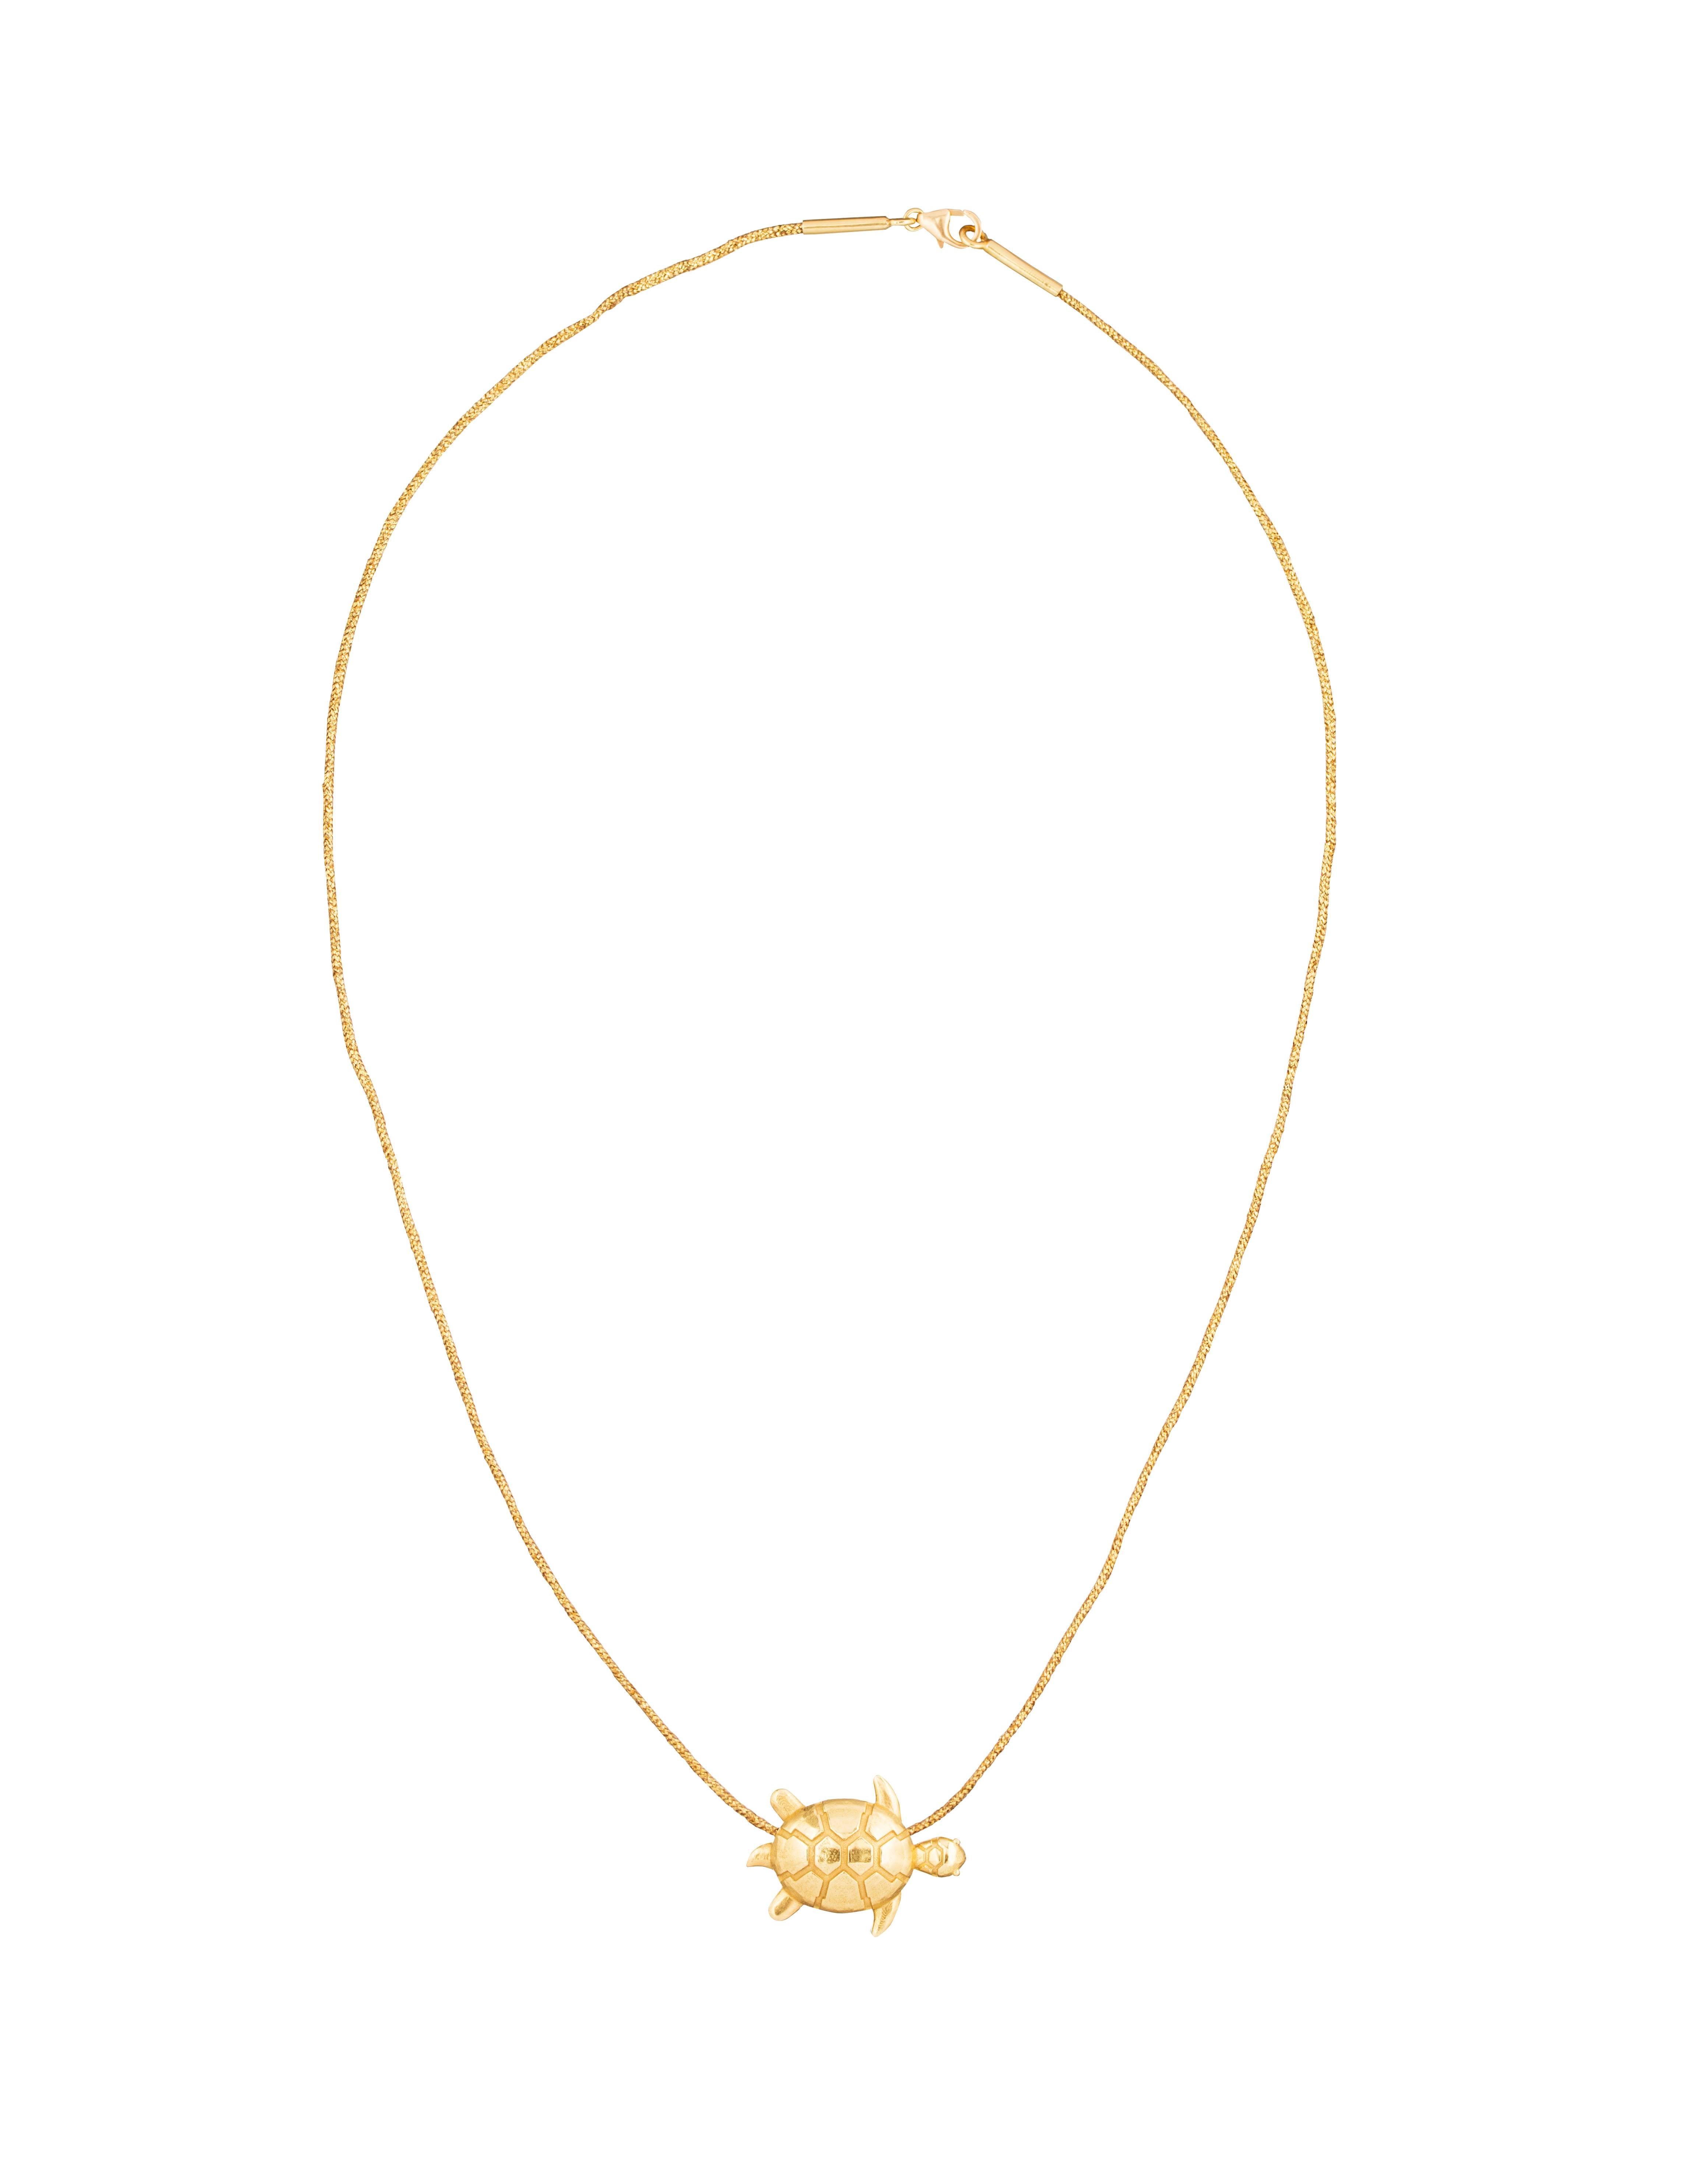 18 Karat Gold Turtle Necklace On Cotton Cord With 18 Karat Gold Clasp. 

The Turtle Is a Symbol Of Prosperity, Growth and Good Luck In Asia and Around The World. I Wear Mine Every Day As a Talisman of Positivity and Luck. There is a Lovely